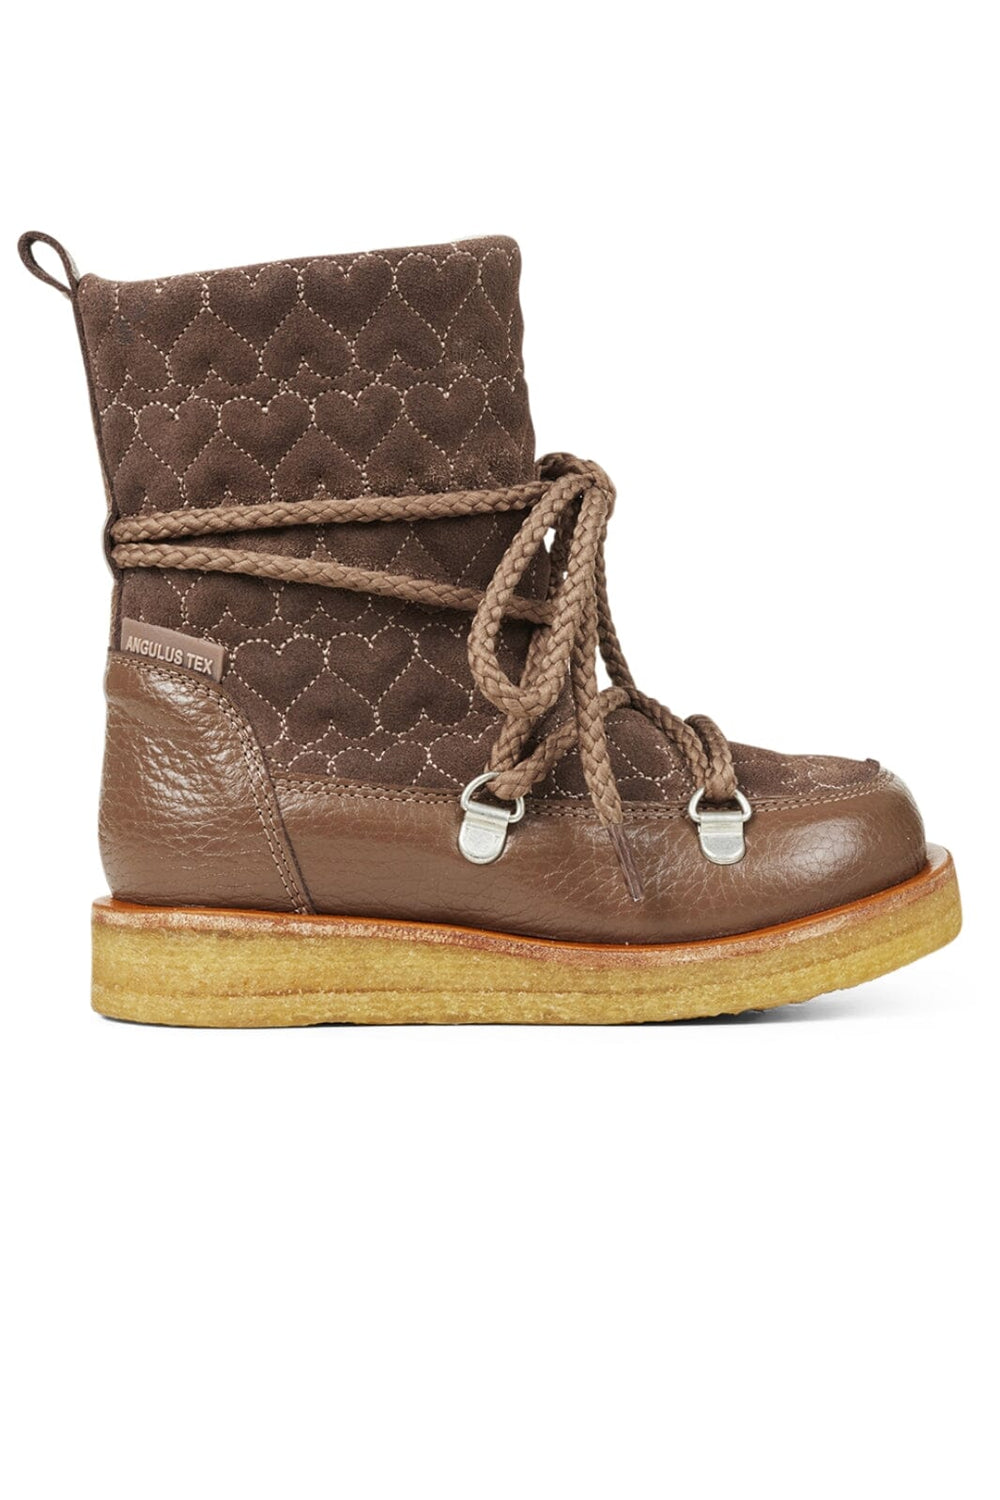 Angulus - TEX-boot with hearts, laces and zipper - 2084 Støvler 